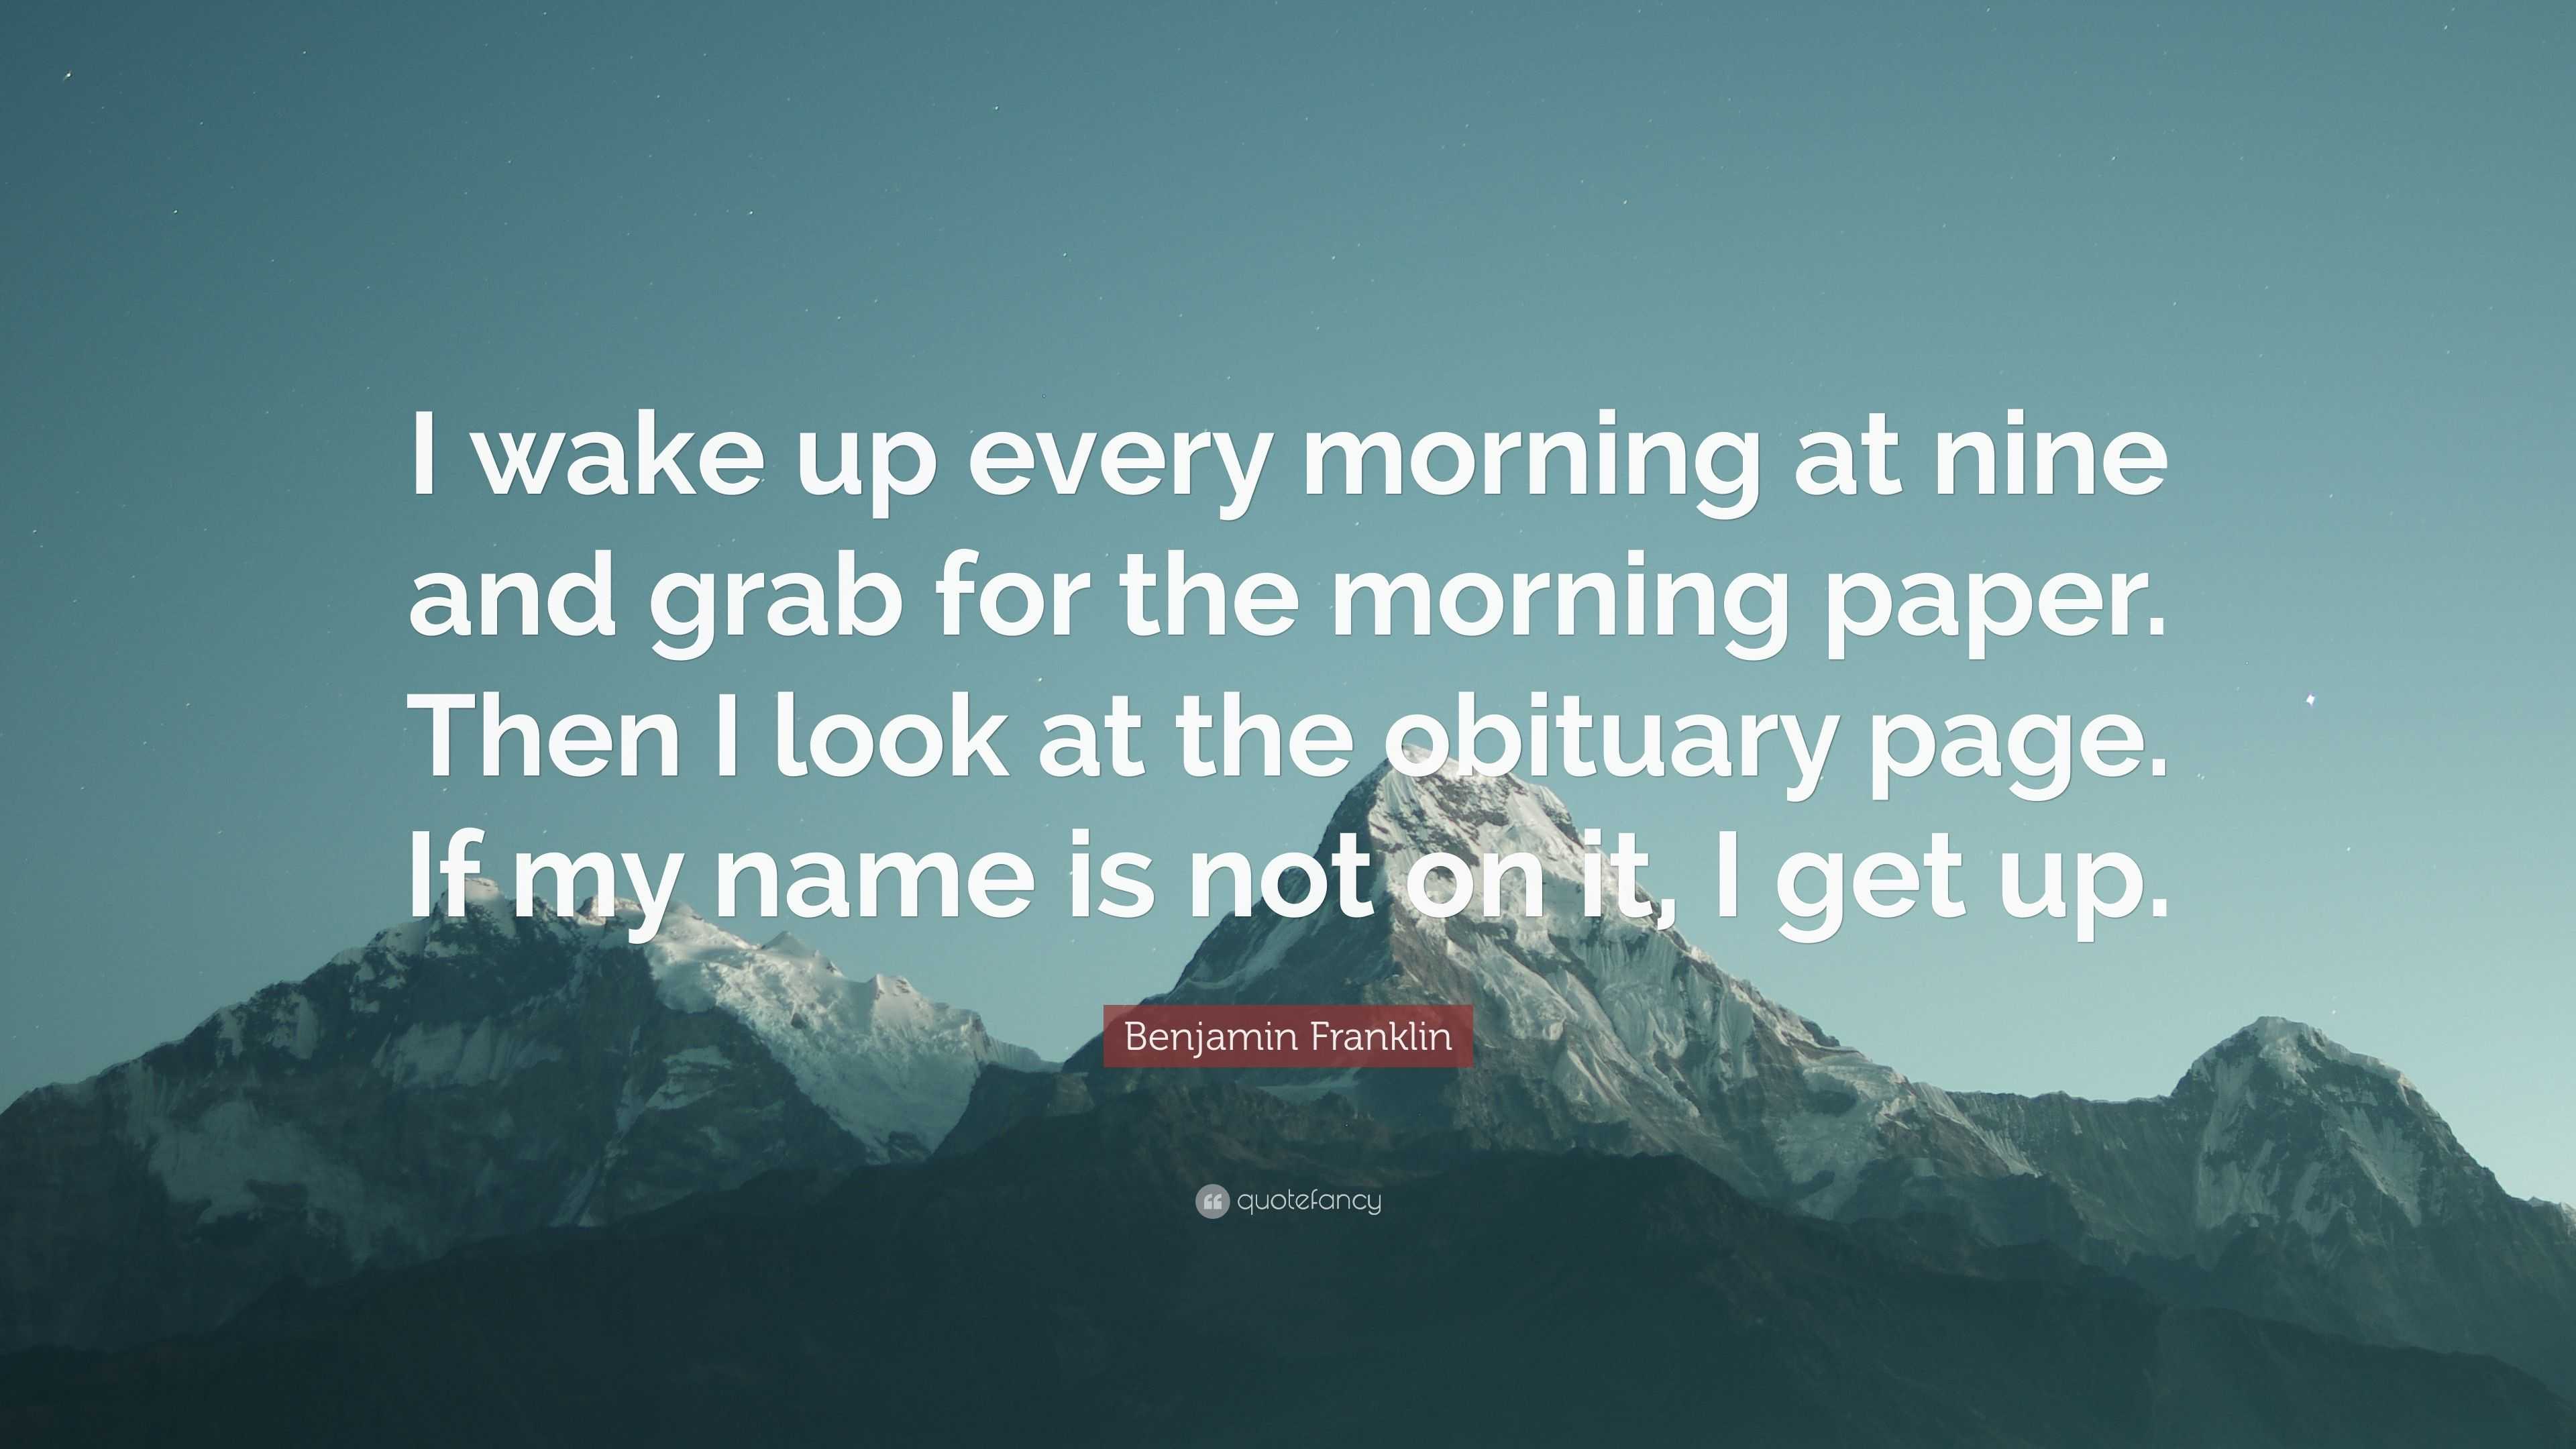 Benjamin Franklin Quote: “I wake up every morning at nine and grab for ...